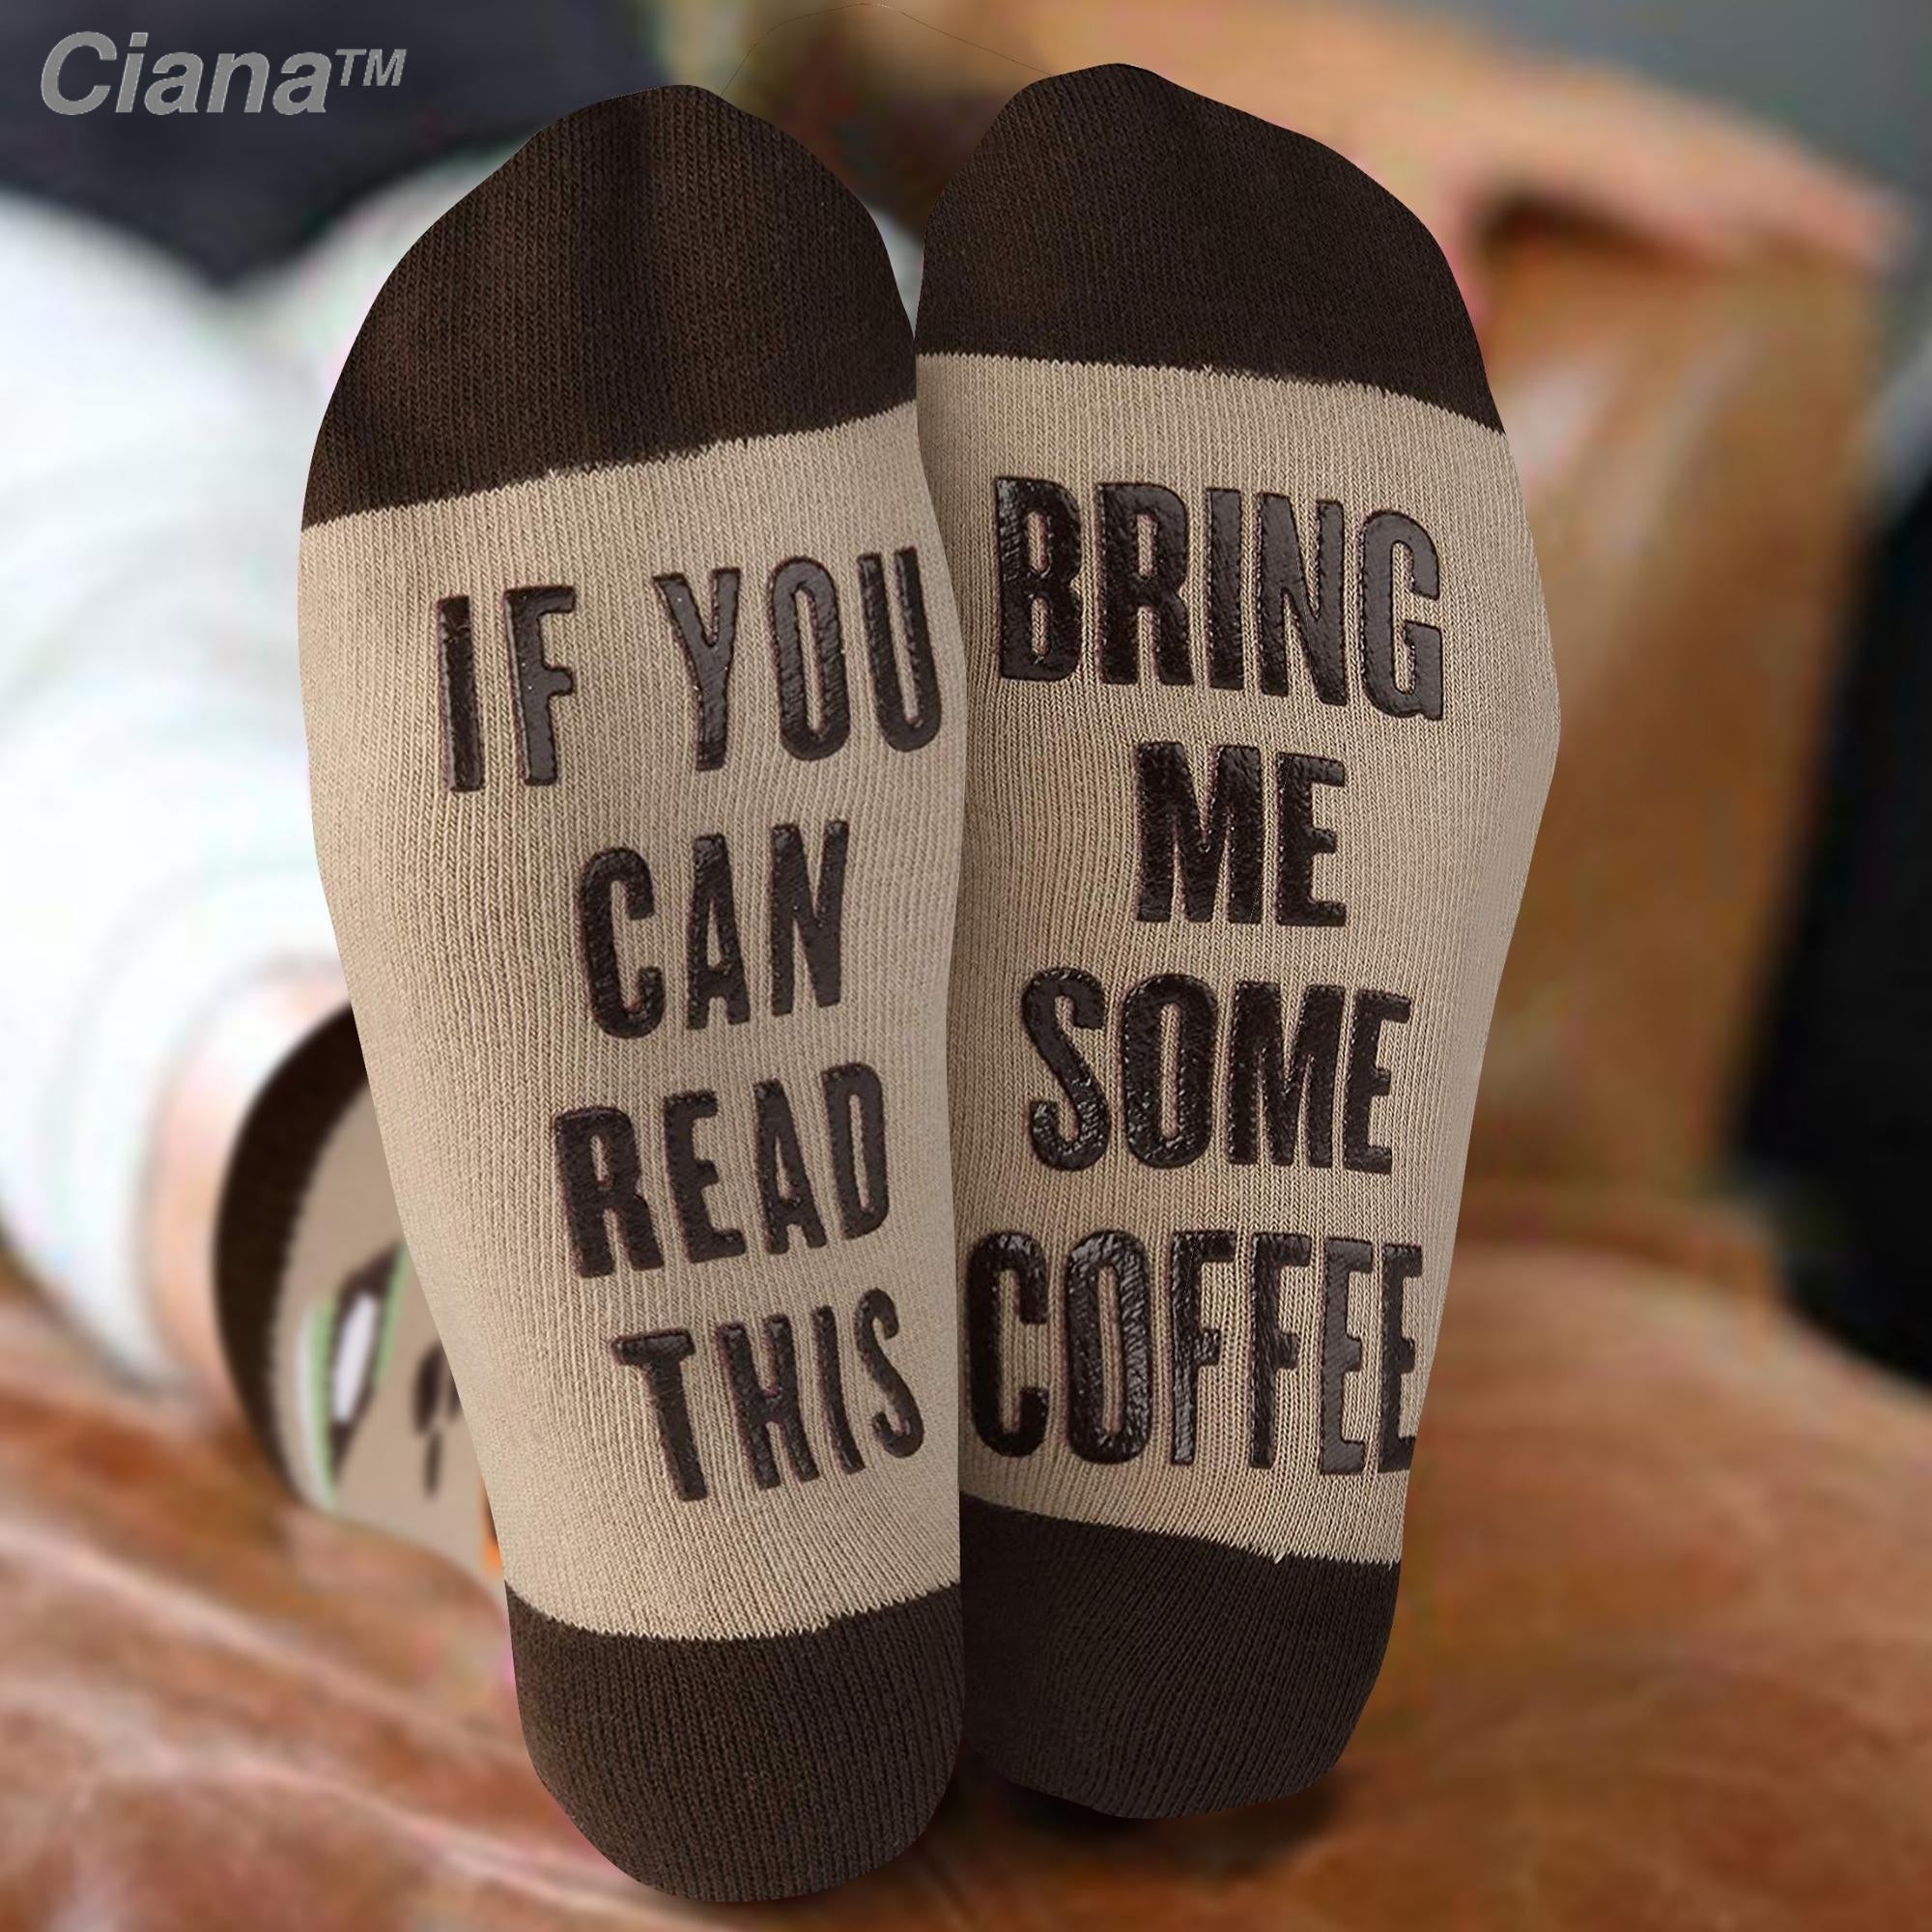 If You Can Read This Socks, Funny Socks, Guitar Gifts, Novelty Socks,  Stocking Stuffer, Gift for Musician, Gift Exchange 62169-SOX2-603 